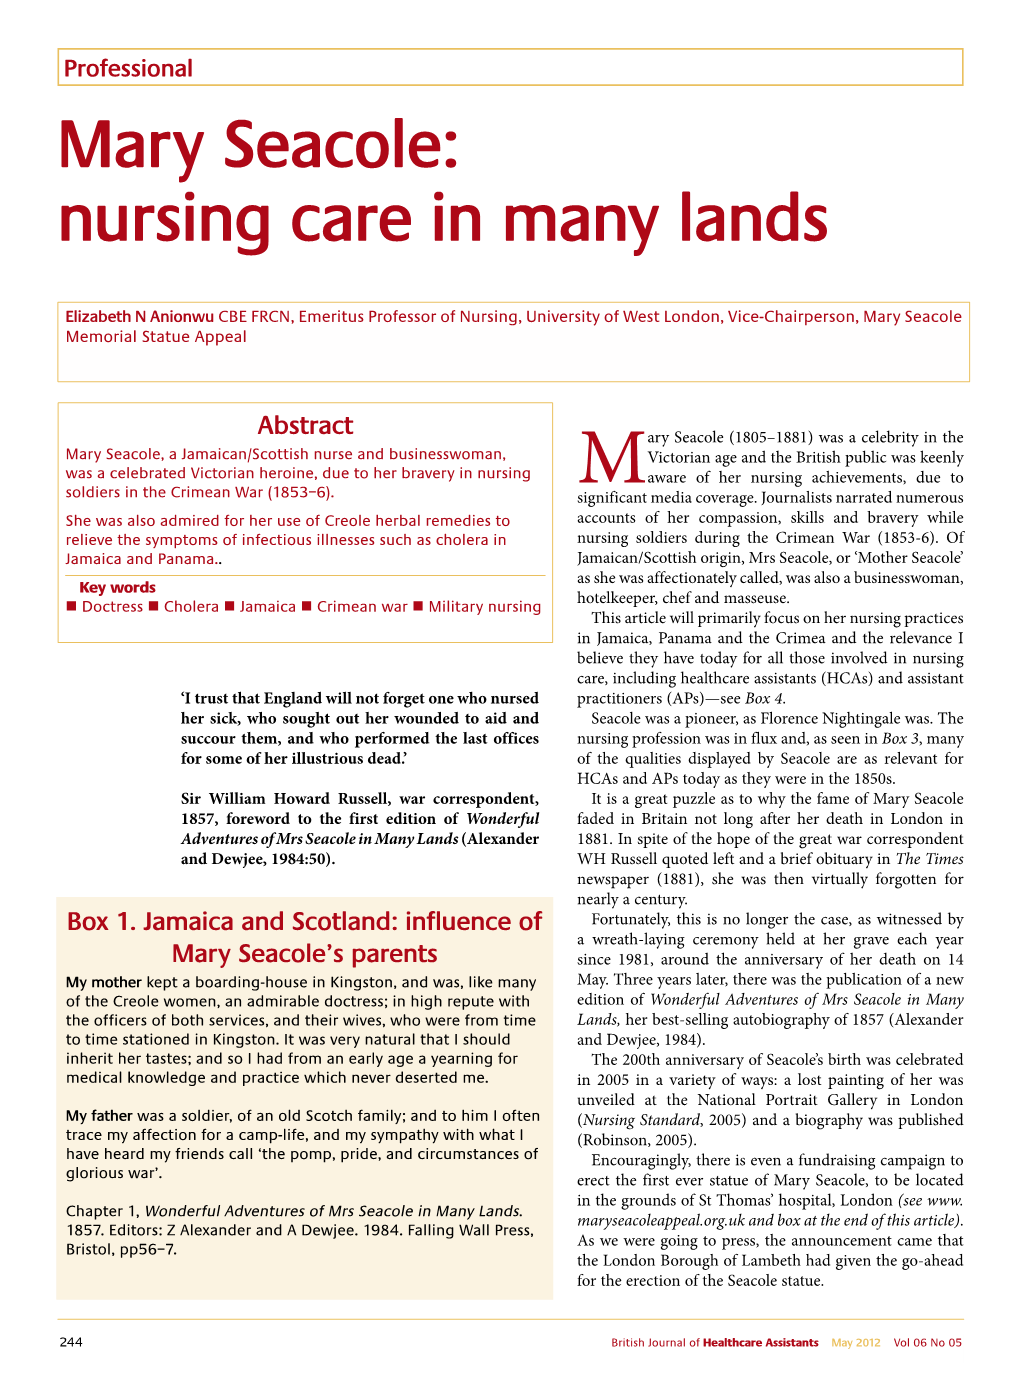 Mary Seacole: Nursing Care in Many Lands